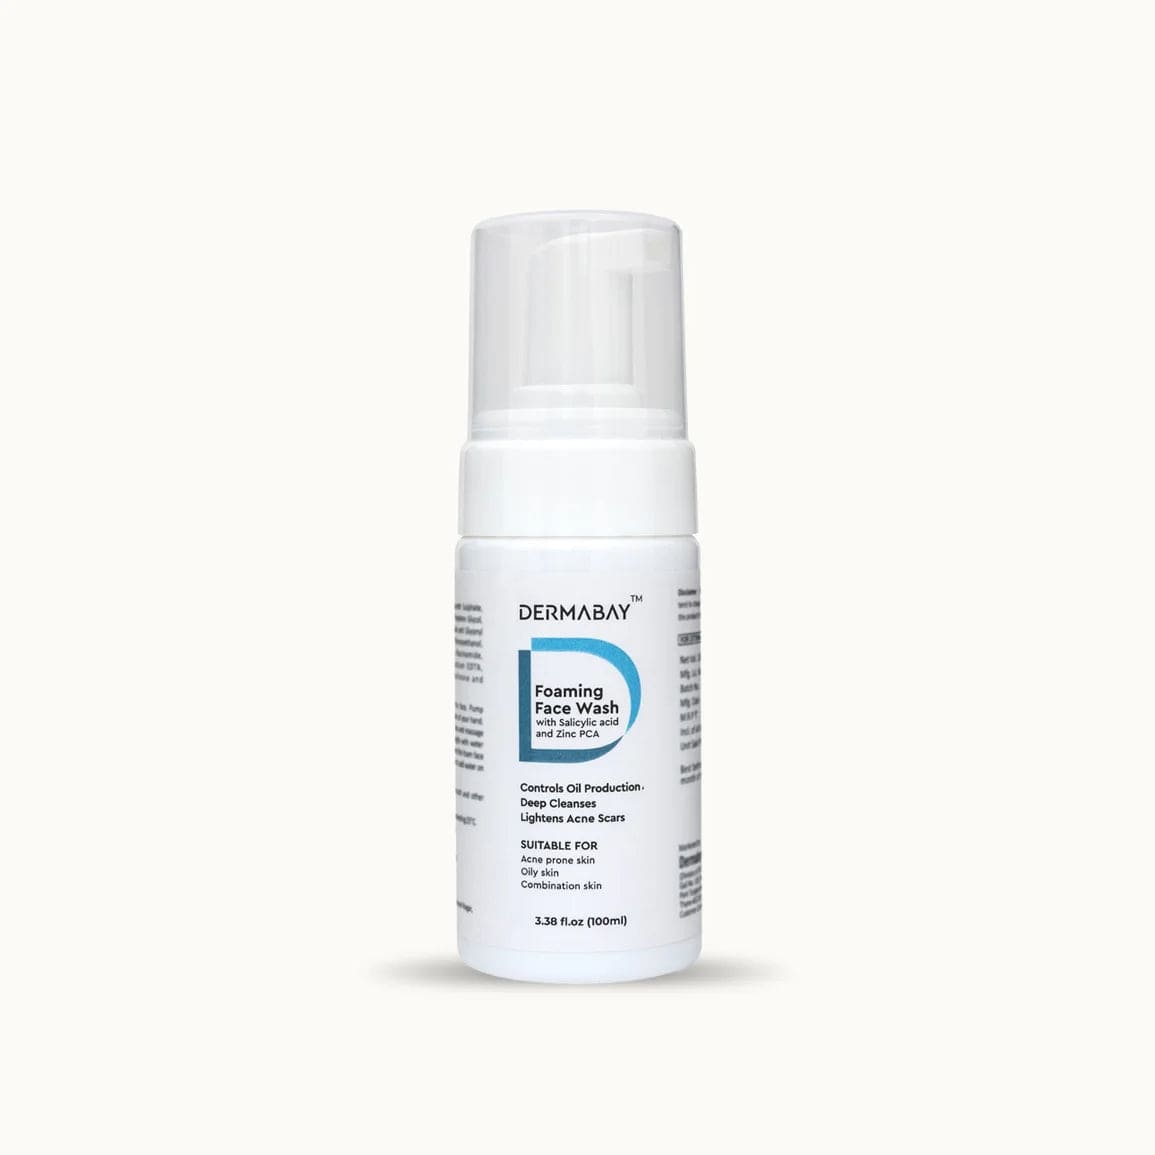 Dermabay Foaming face wash